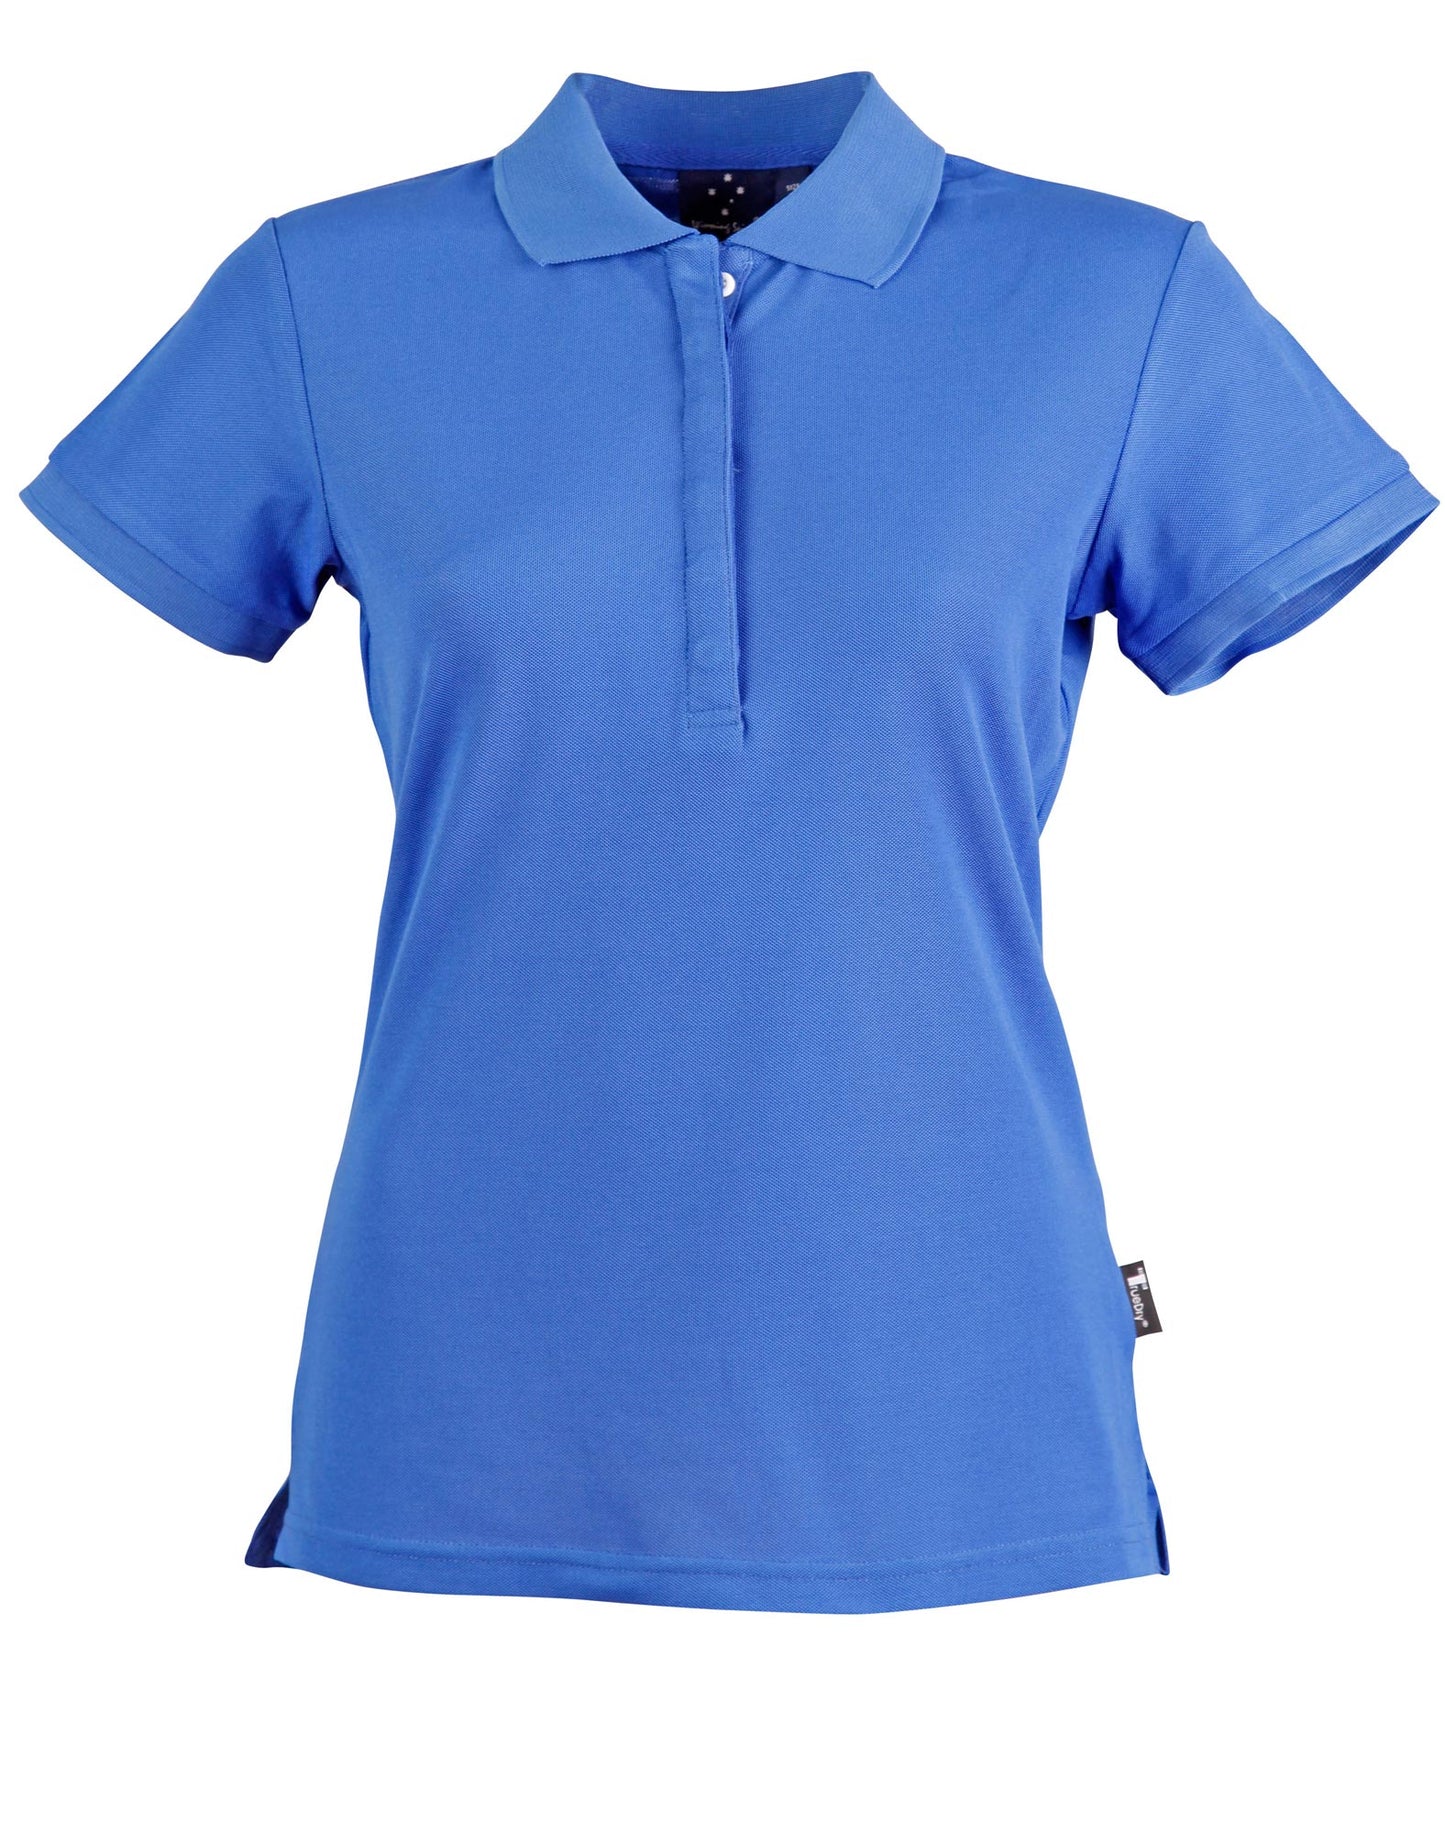 Winning Spirit Ladies' TrueDry® Solid Colour Pique Polo 2nd (7 Colour) (PS64)